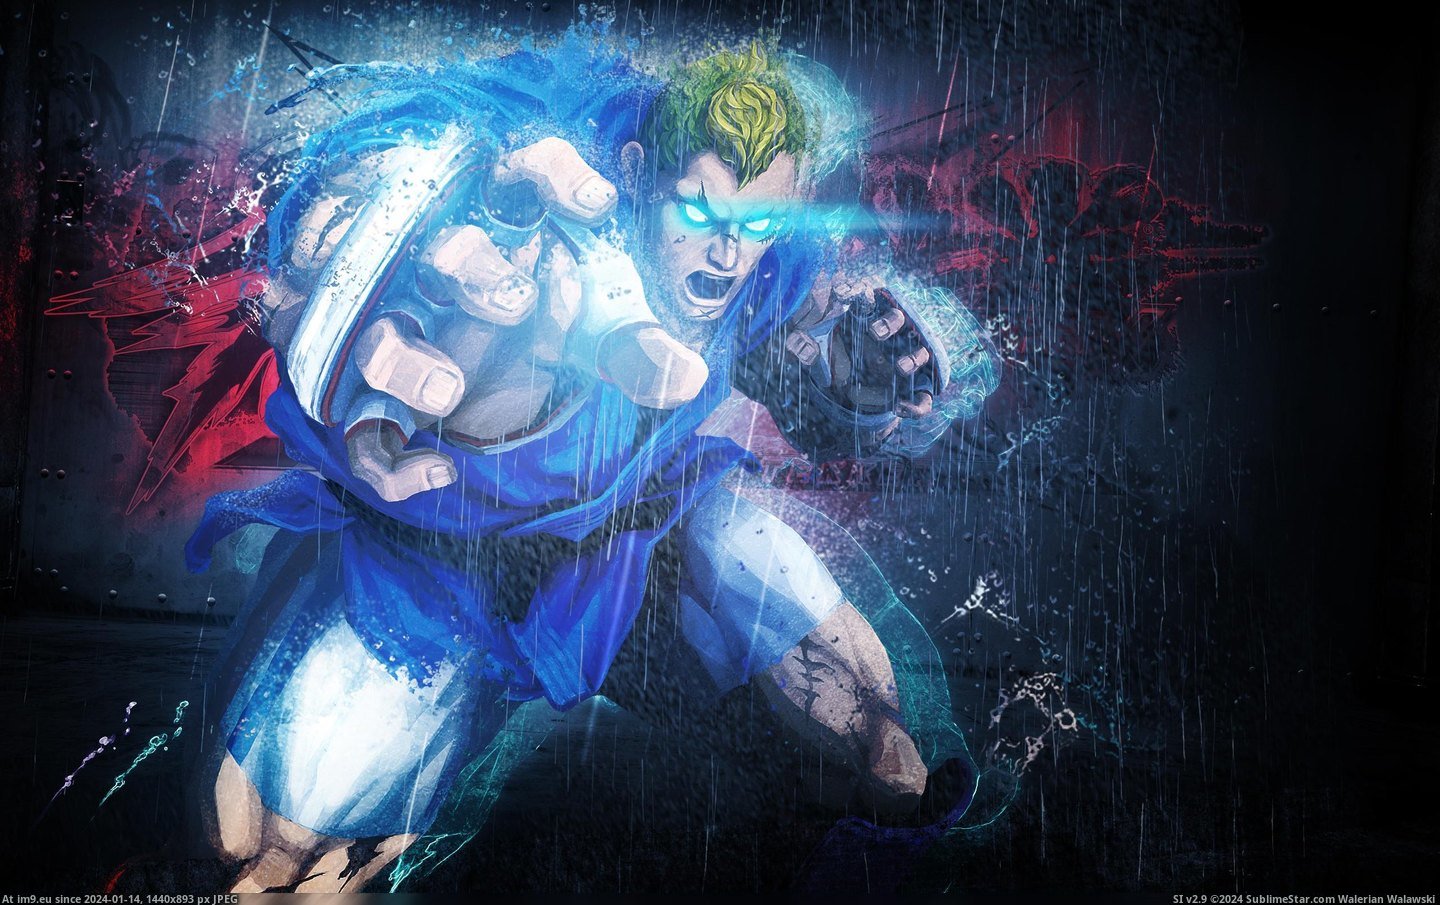 #Wallpaper #Wide #Abel #Street #Fighter Abel In The Street Fighter Wide HD Wallpaper Pic. (Image of album Unique HD Wallpapers))